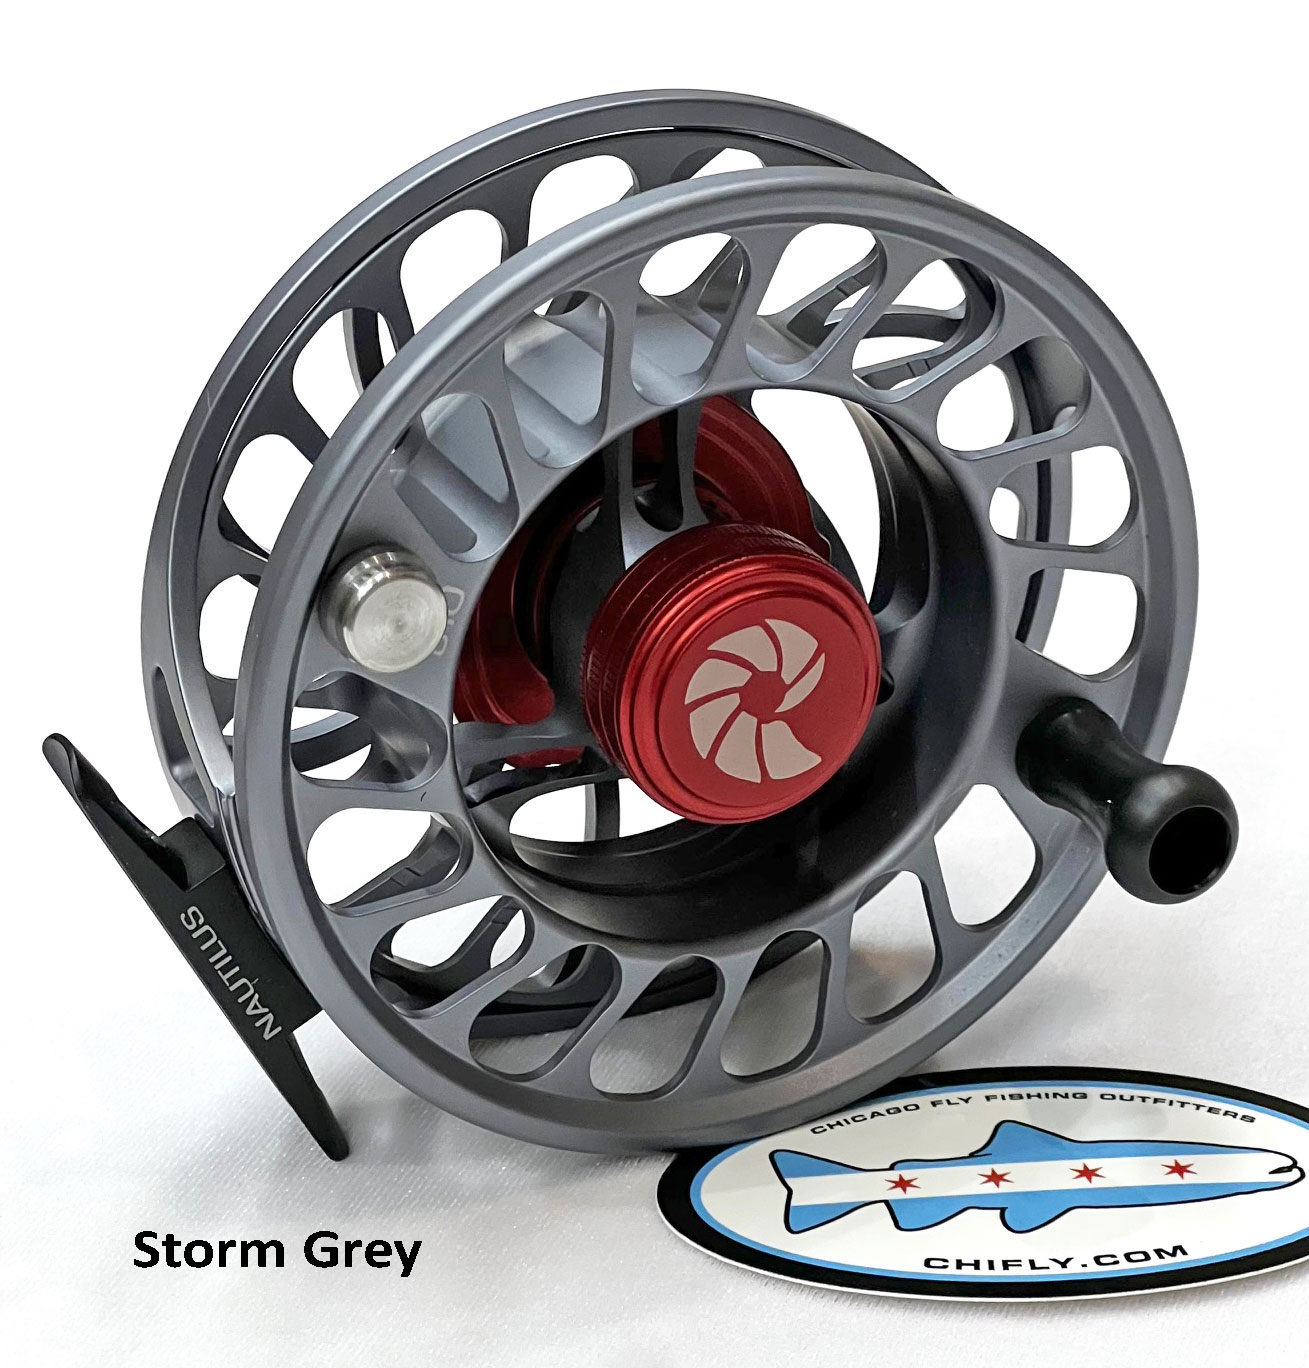 Nautilus CCF-X2 and Silver King Reels - Fly Reels & Spare Spools